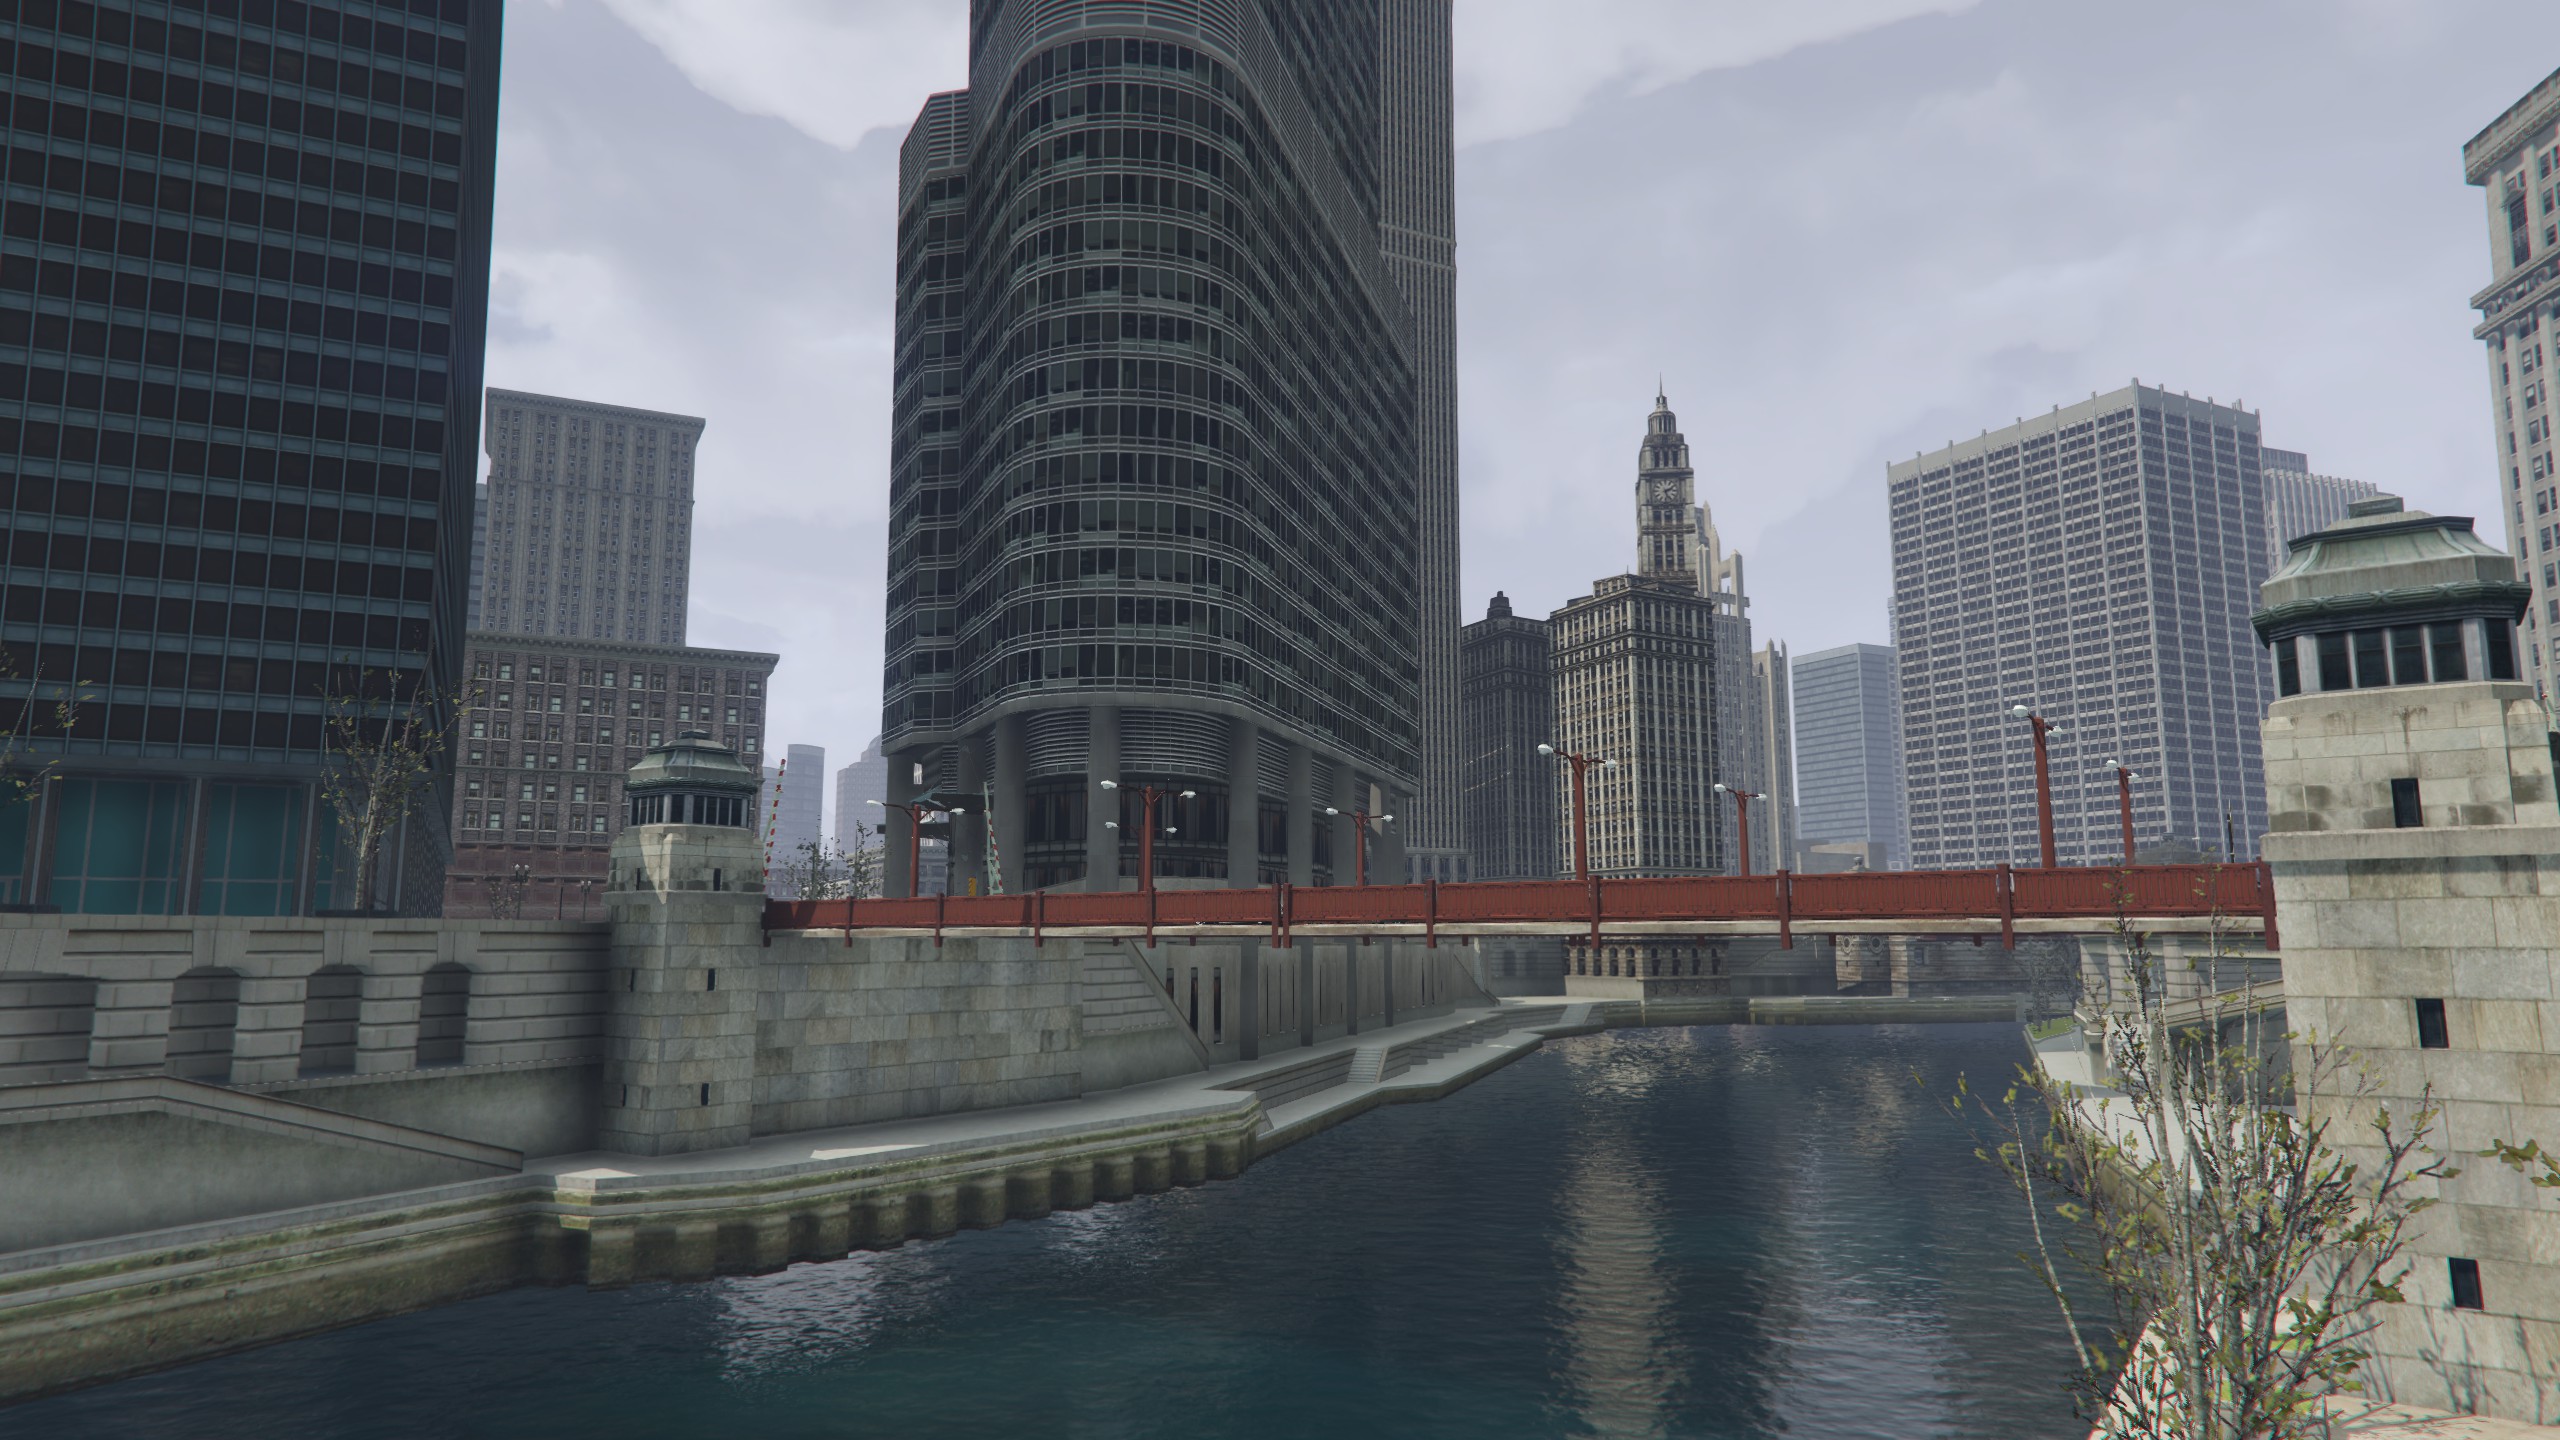 This Mod Adds An ENTIRELY NEW CITY To GTA 5 (GTA Chicago) 